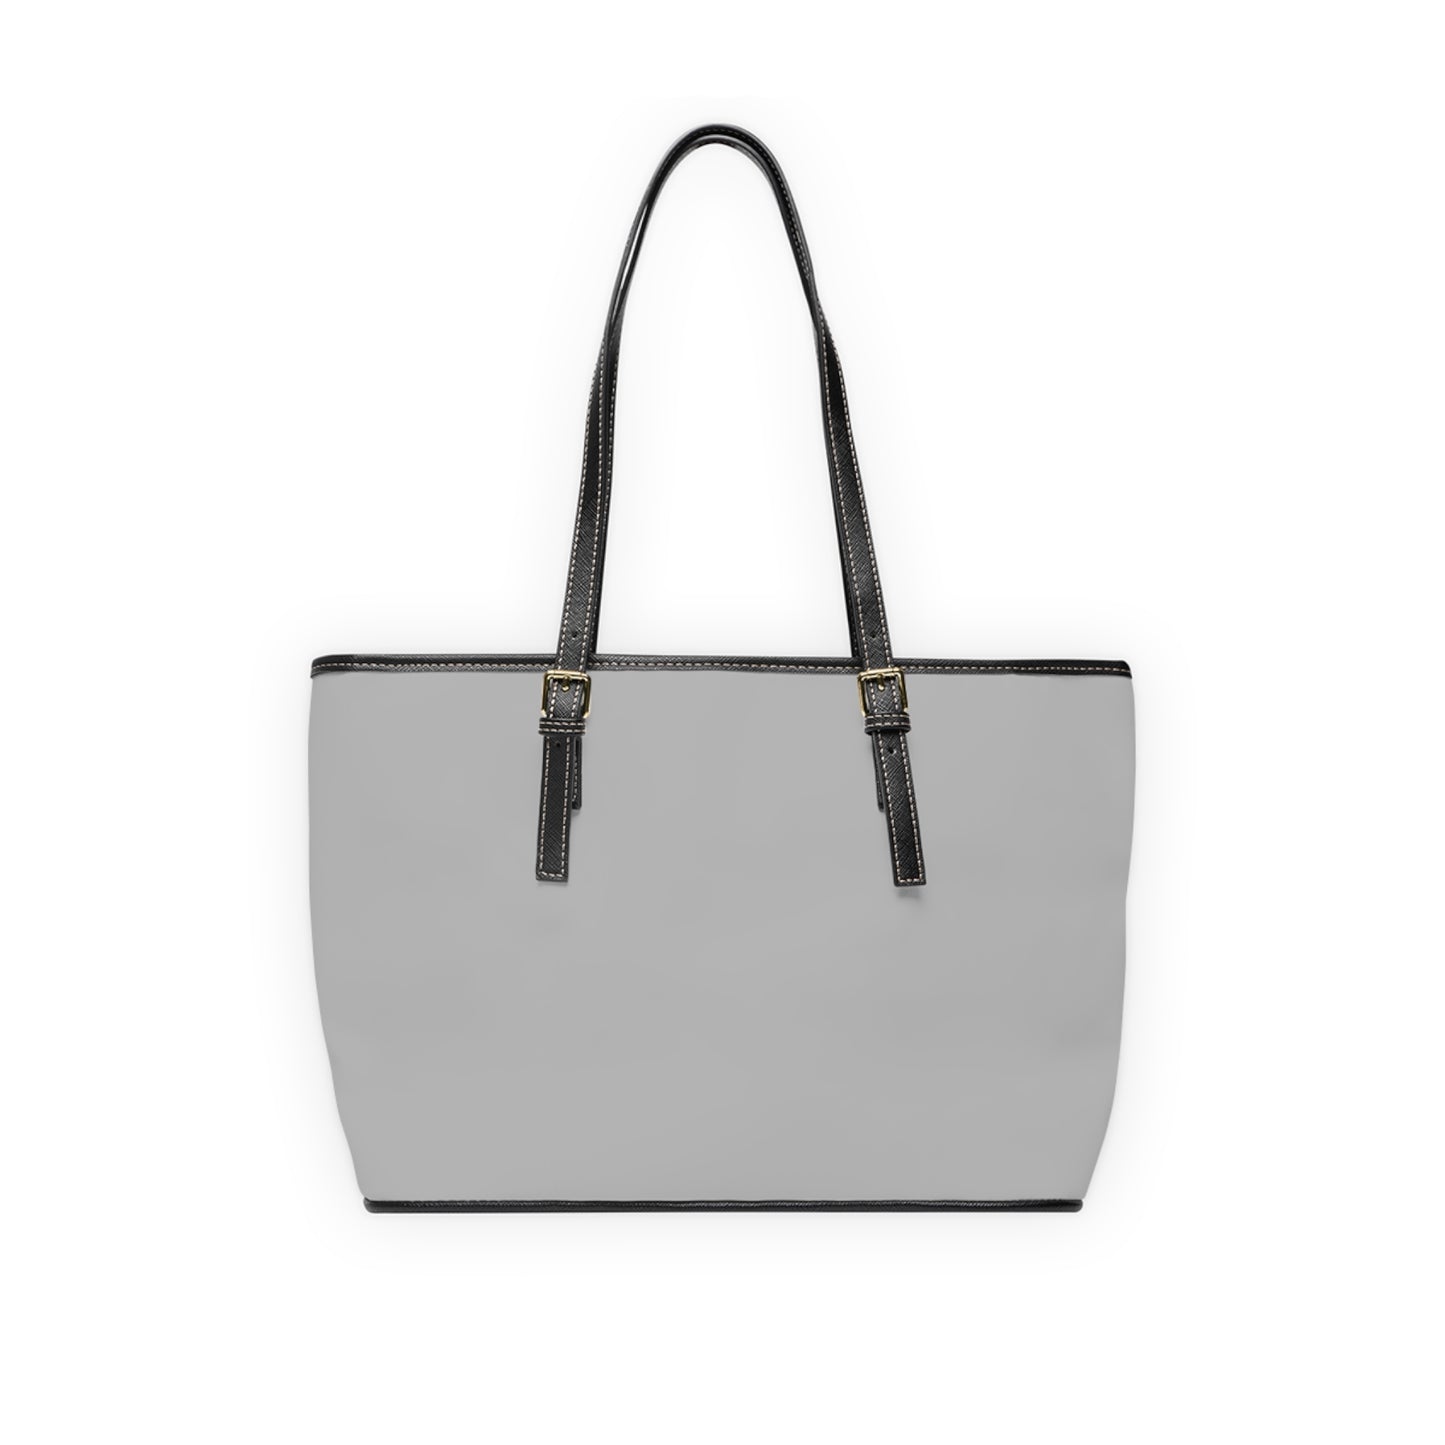 Style meets function: our faux leather shoulder bag for women,The perfect complement